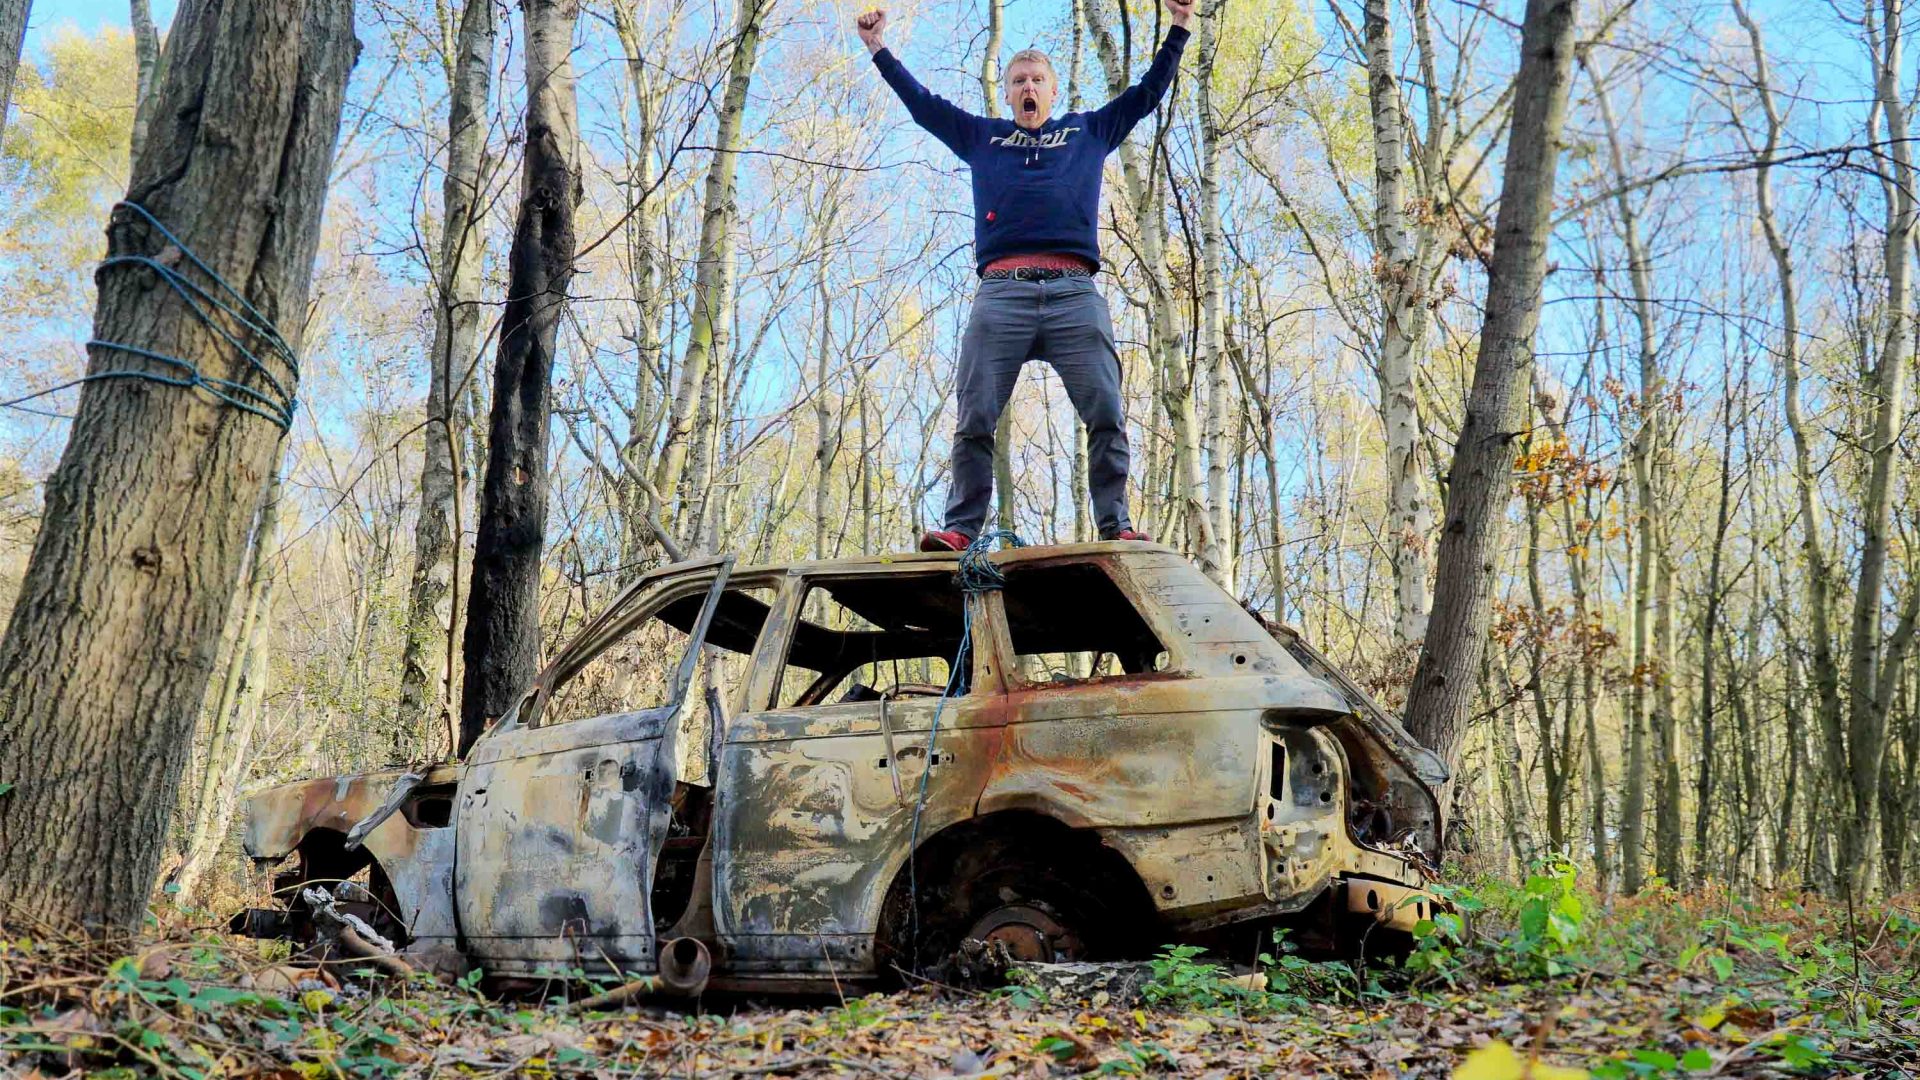 Alastair stands on top of an abandoned car in a forested area. His arms are outstretched.